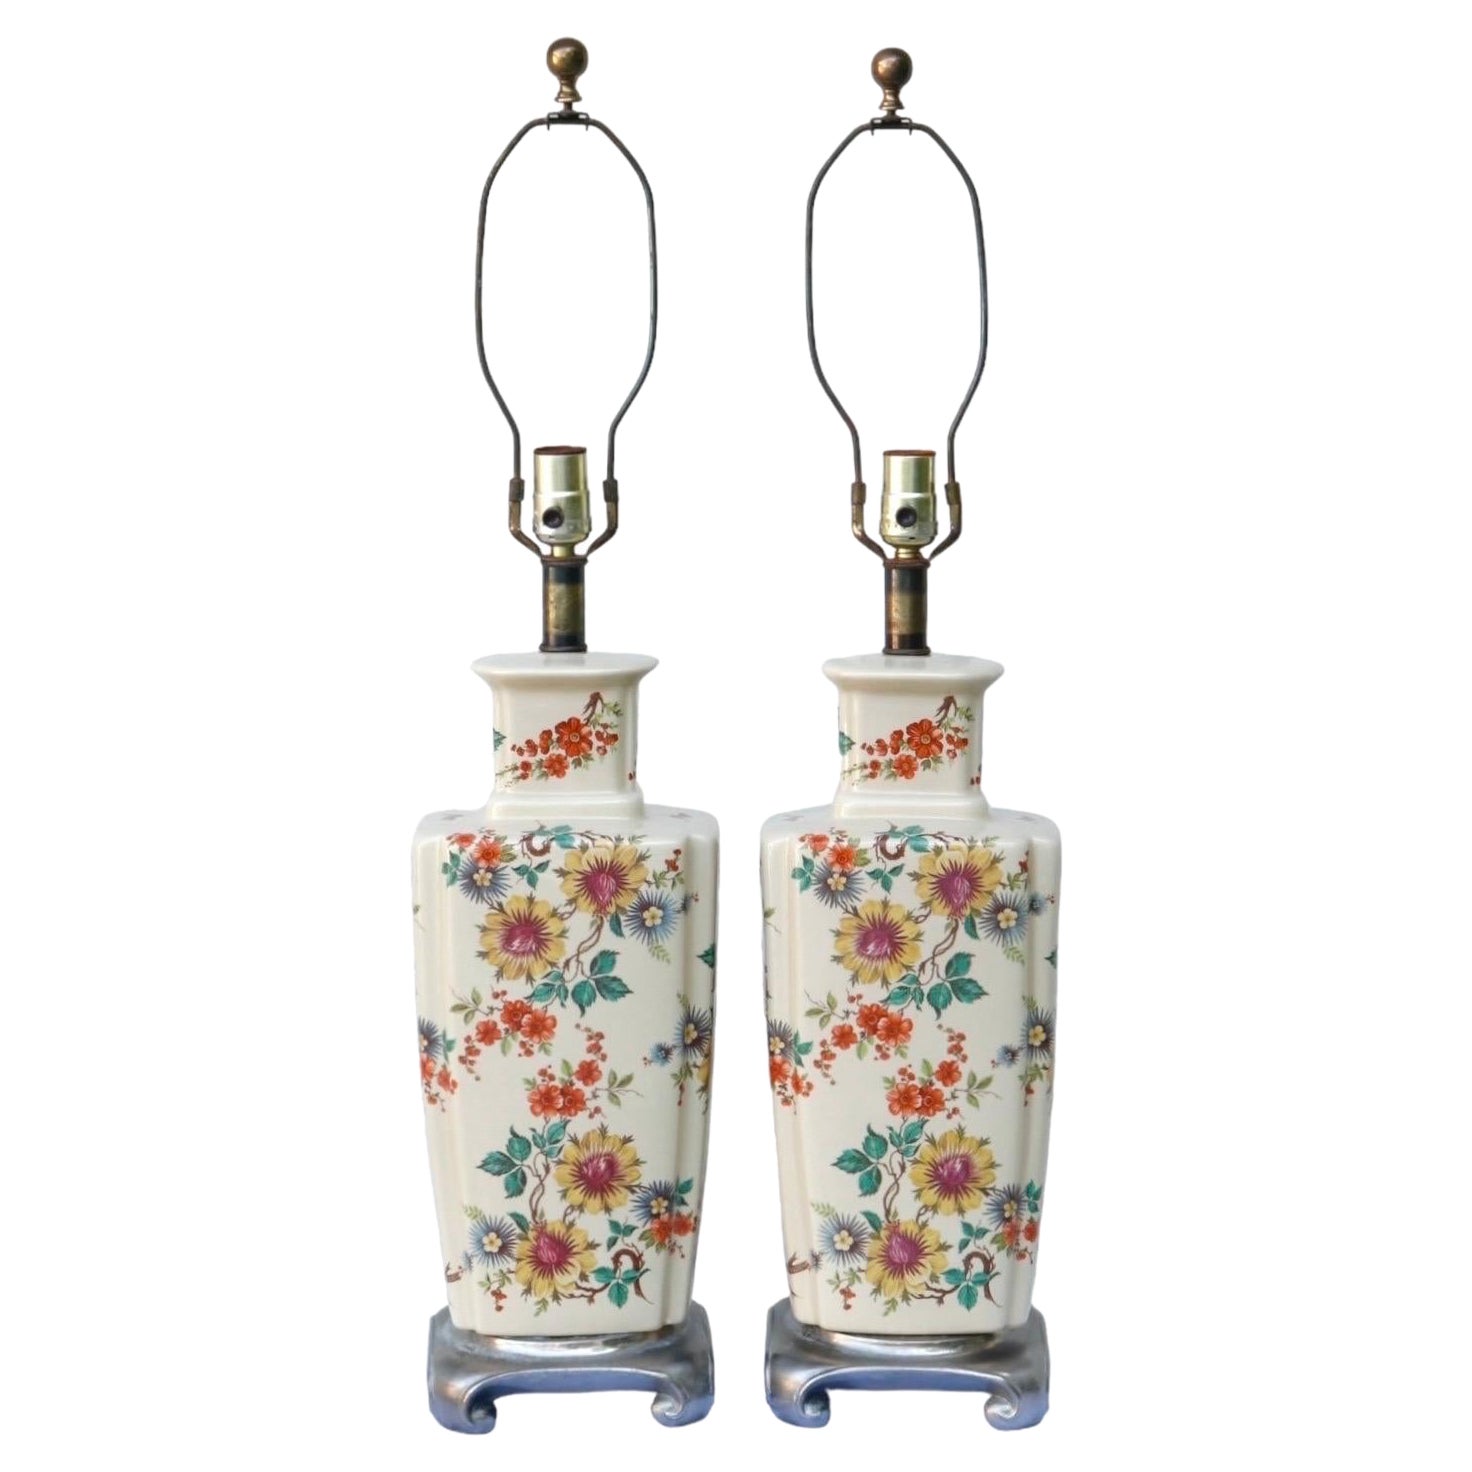 Ming Floral Ceramic Table Lamps - a Pair